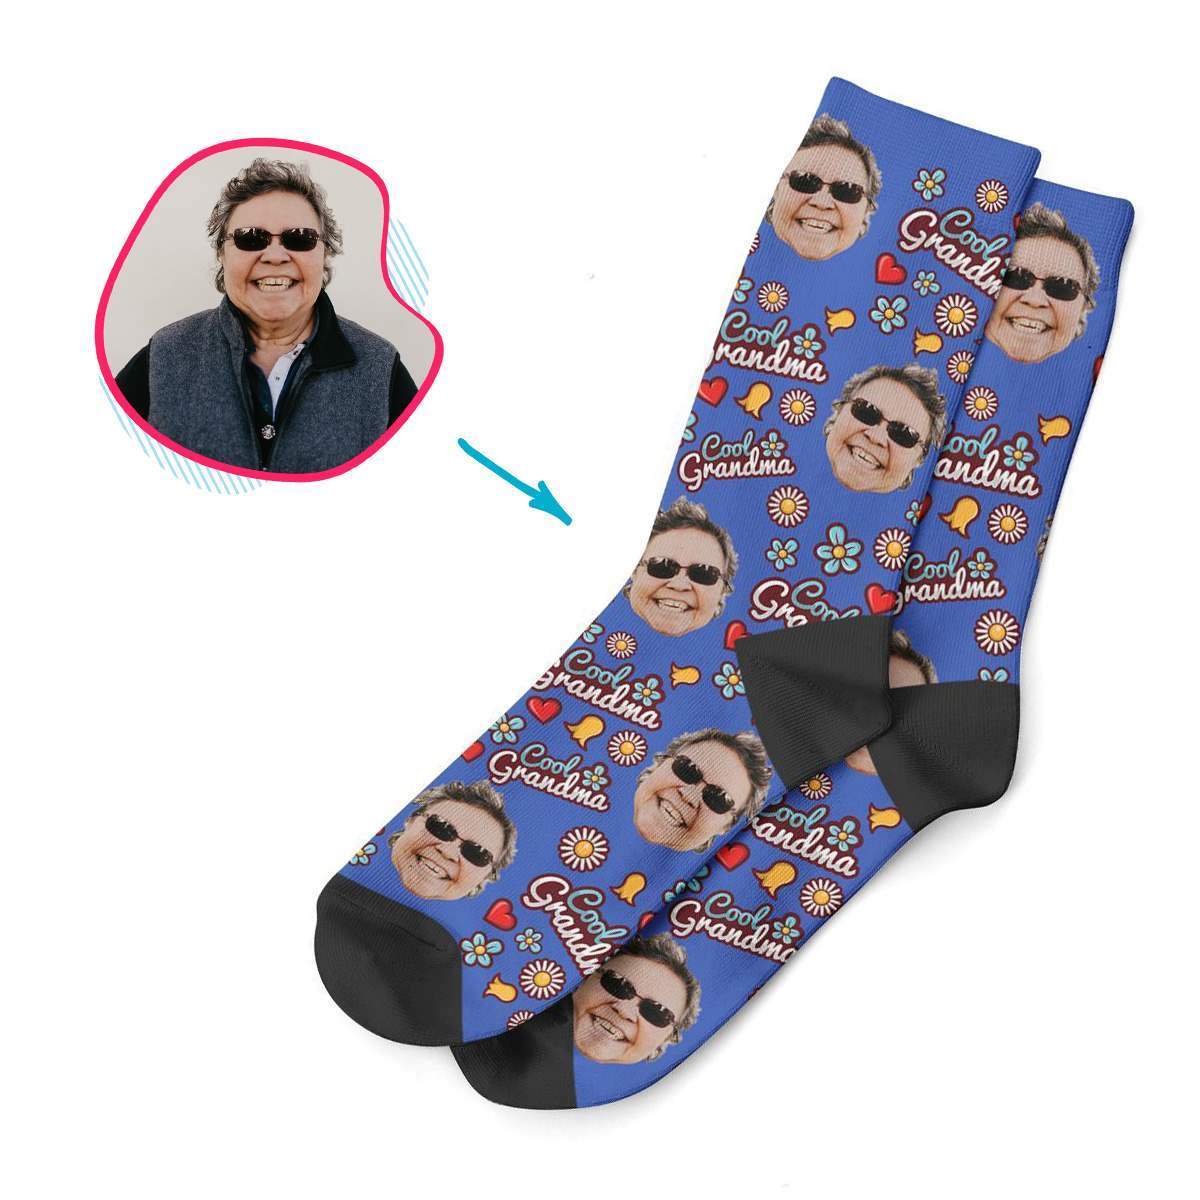 mint Cool Grandmother socks personalized with photo of face printed on them